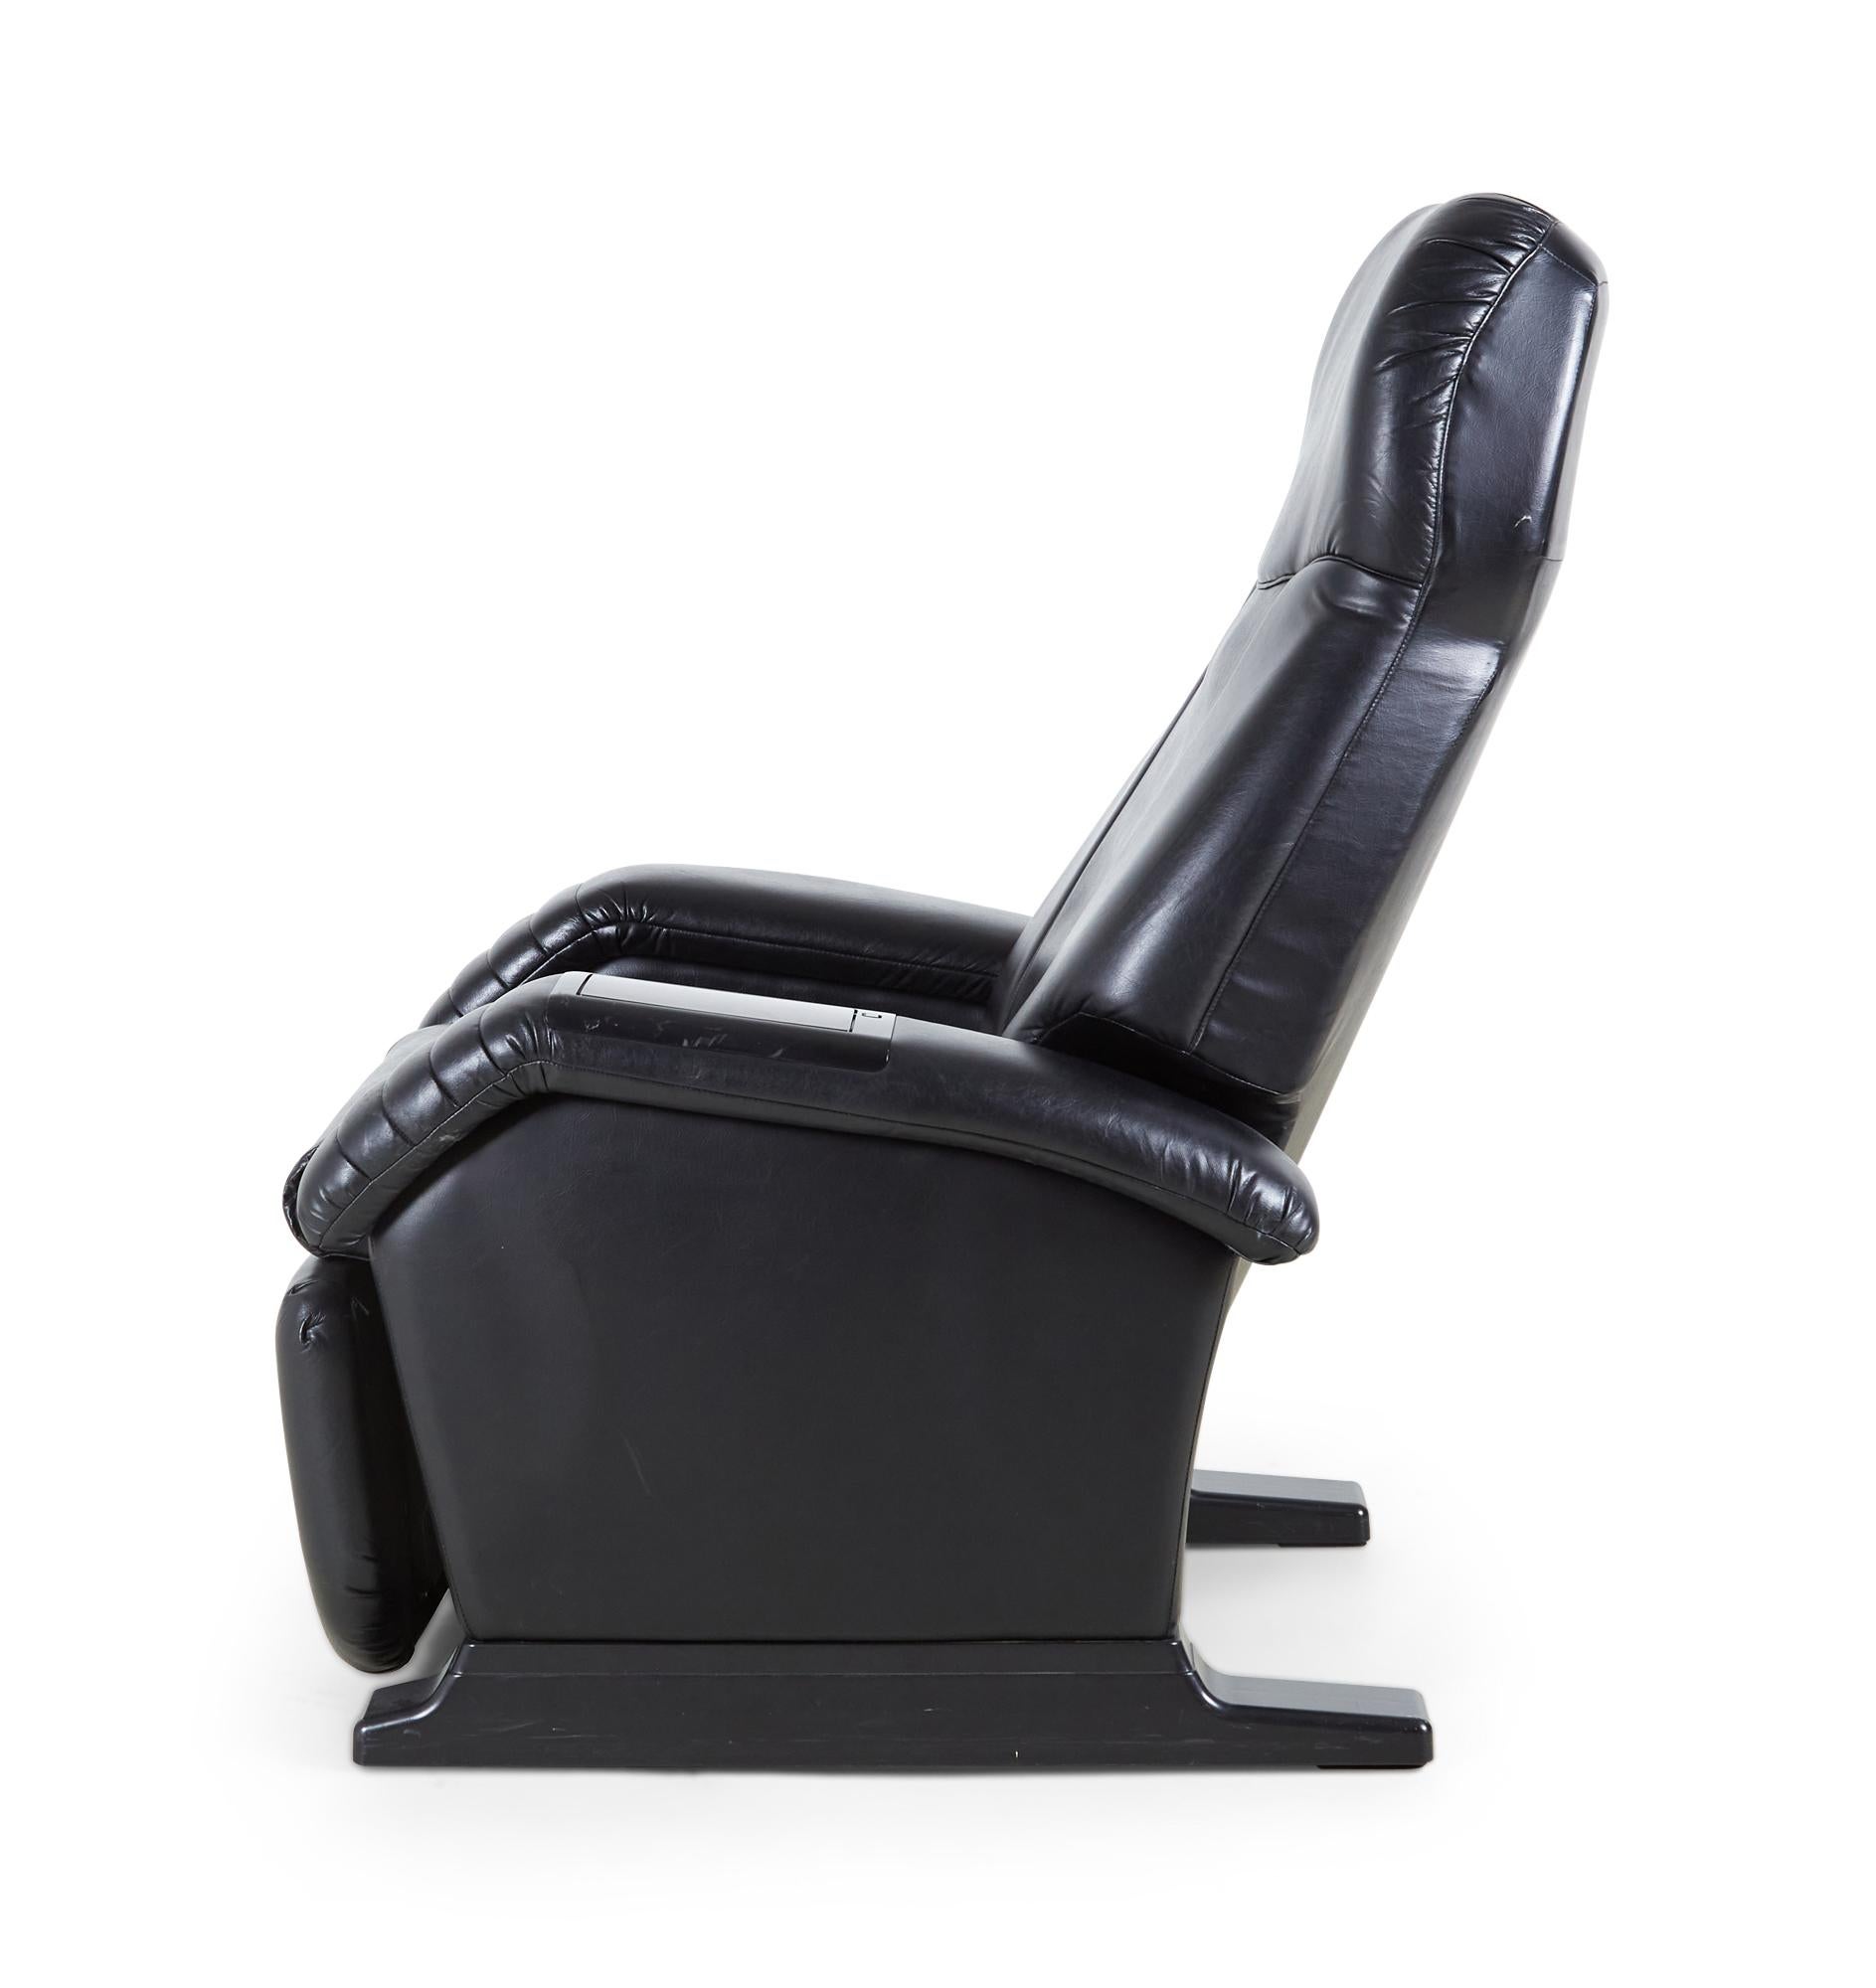 American contemporary black leather massage recliner armchair with control panel in the padded armrest and cassette player (GET-A-WAY Model GS-01, working).
  